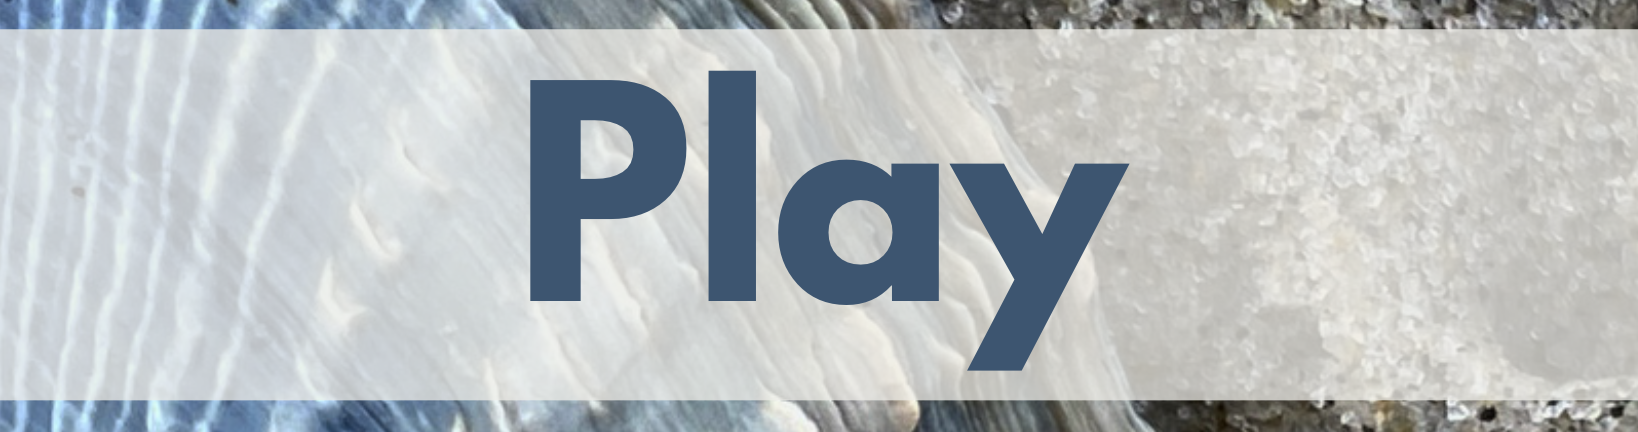 PLAY banner